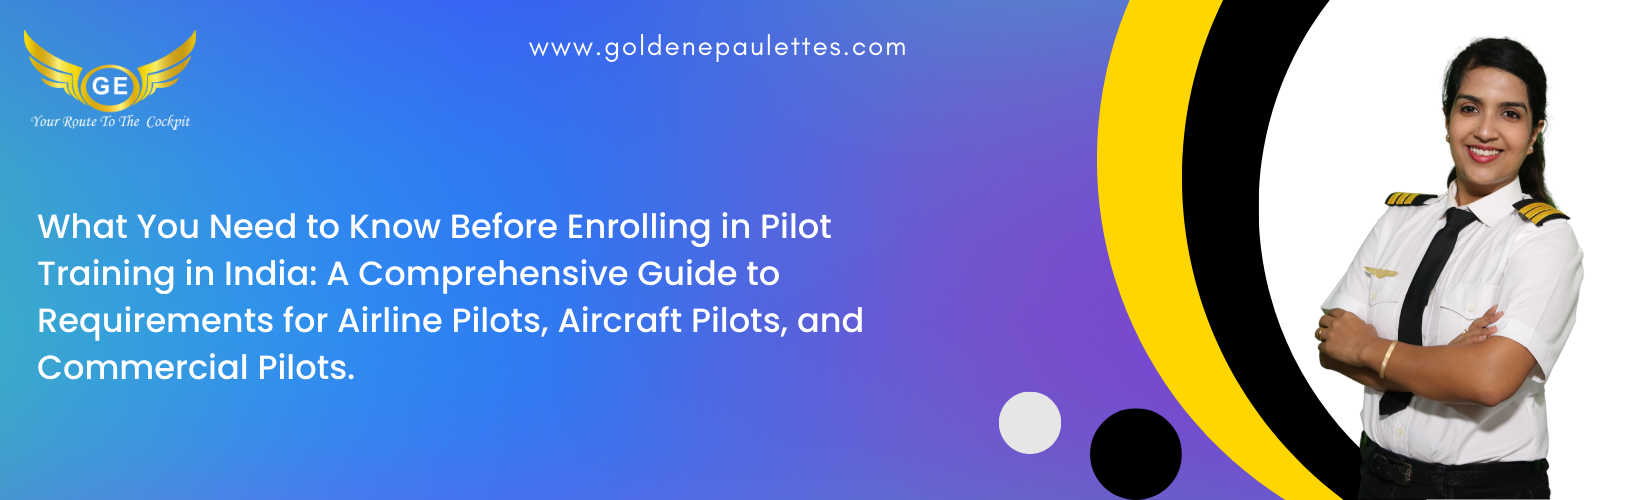 What You Need to Know Before Enrolling in Pilot Training in India